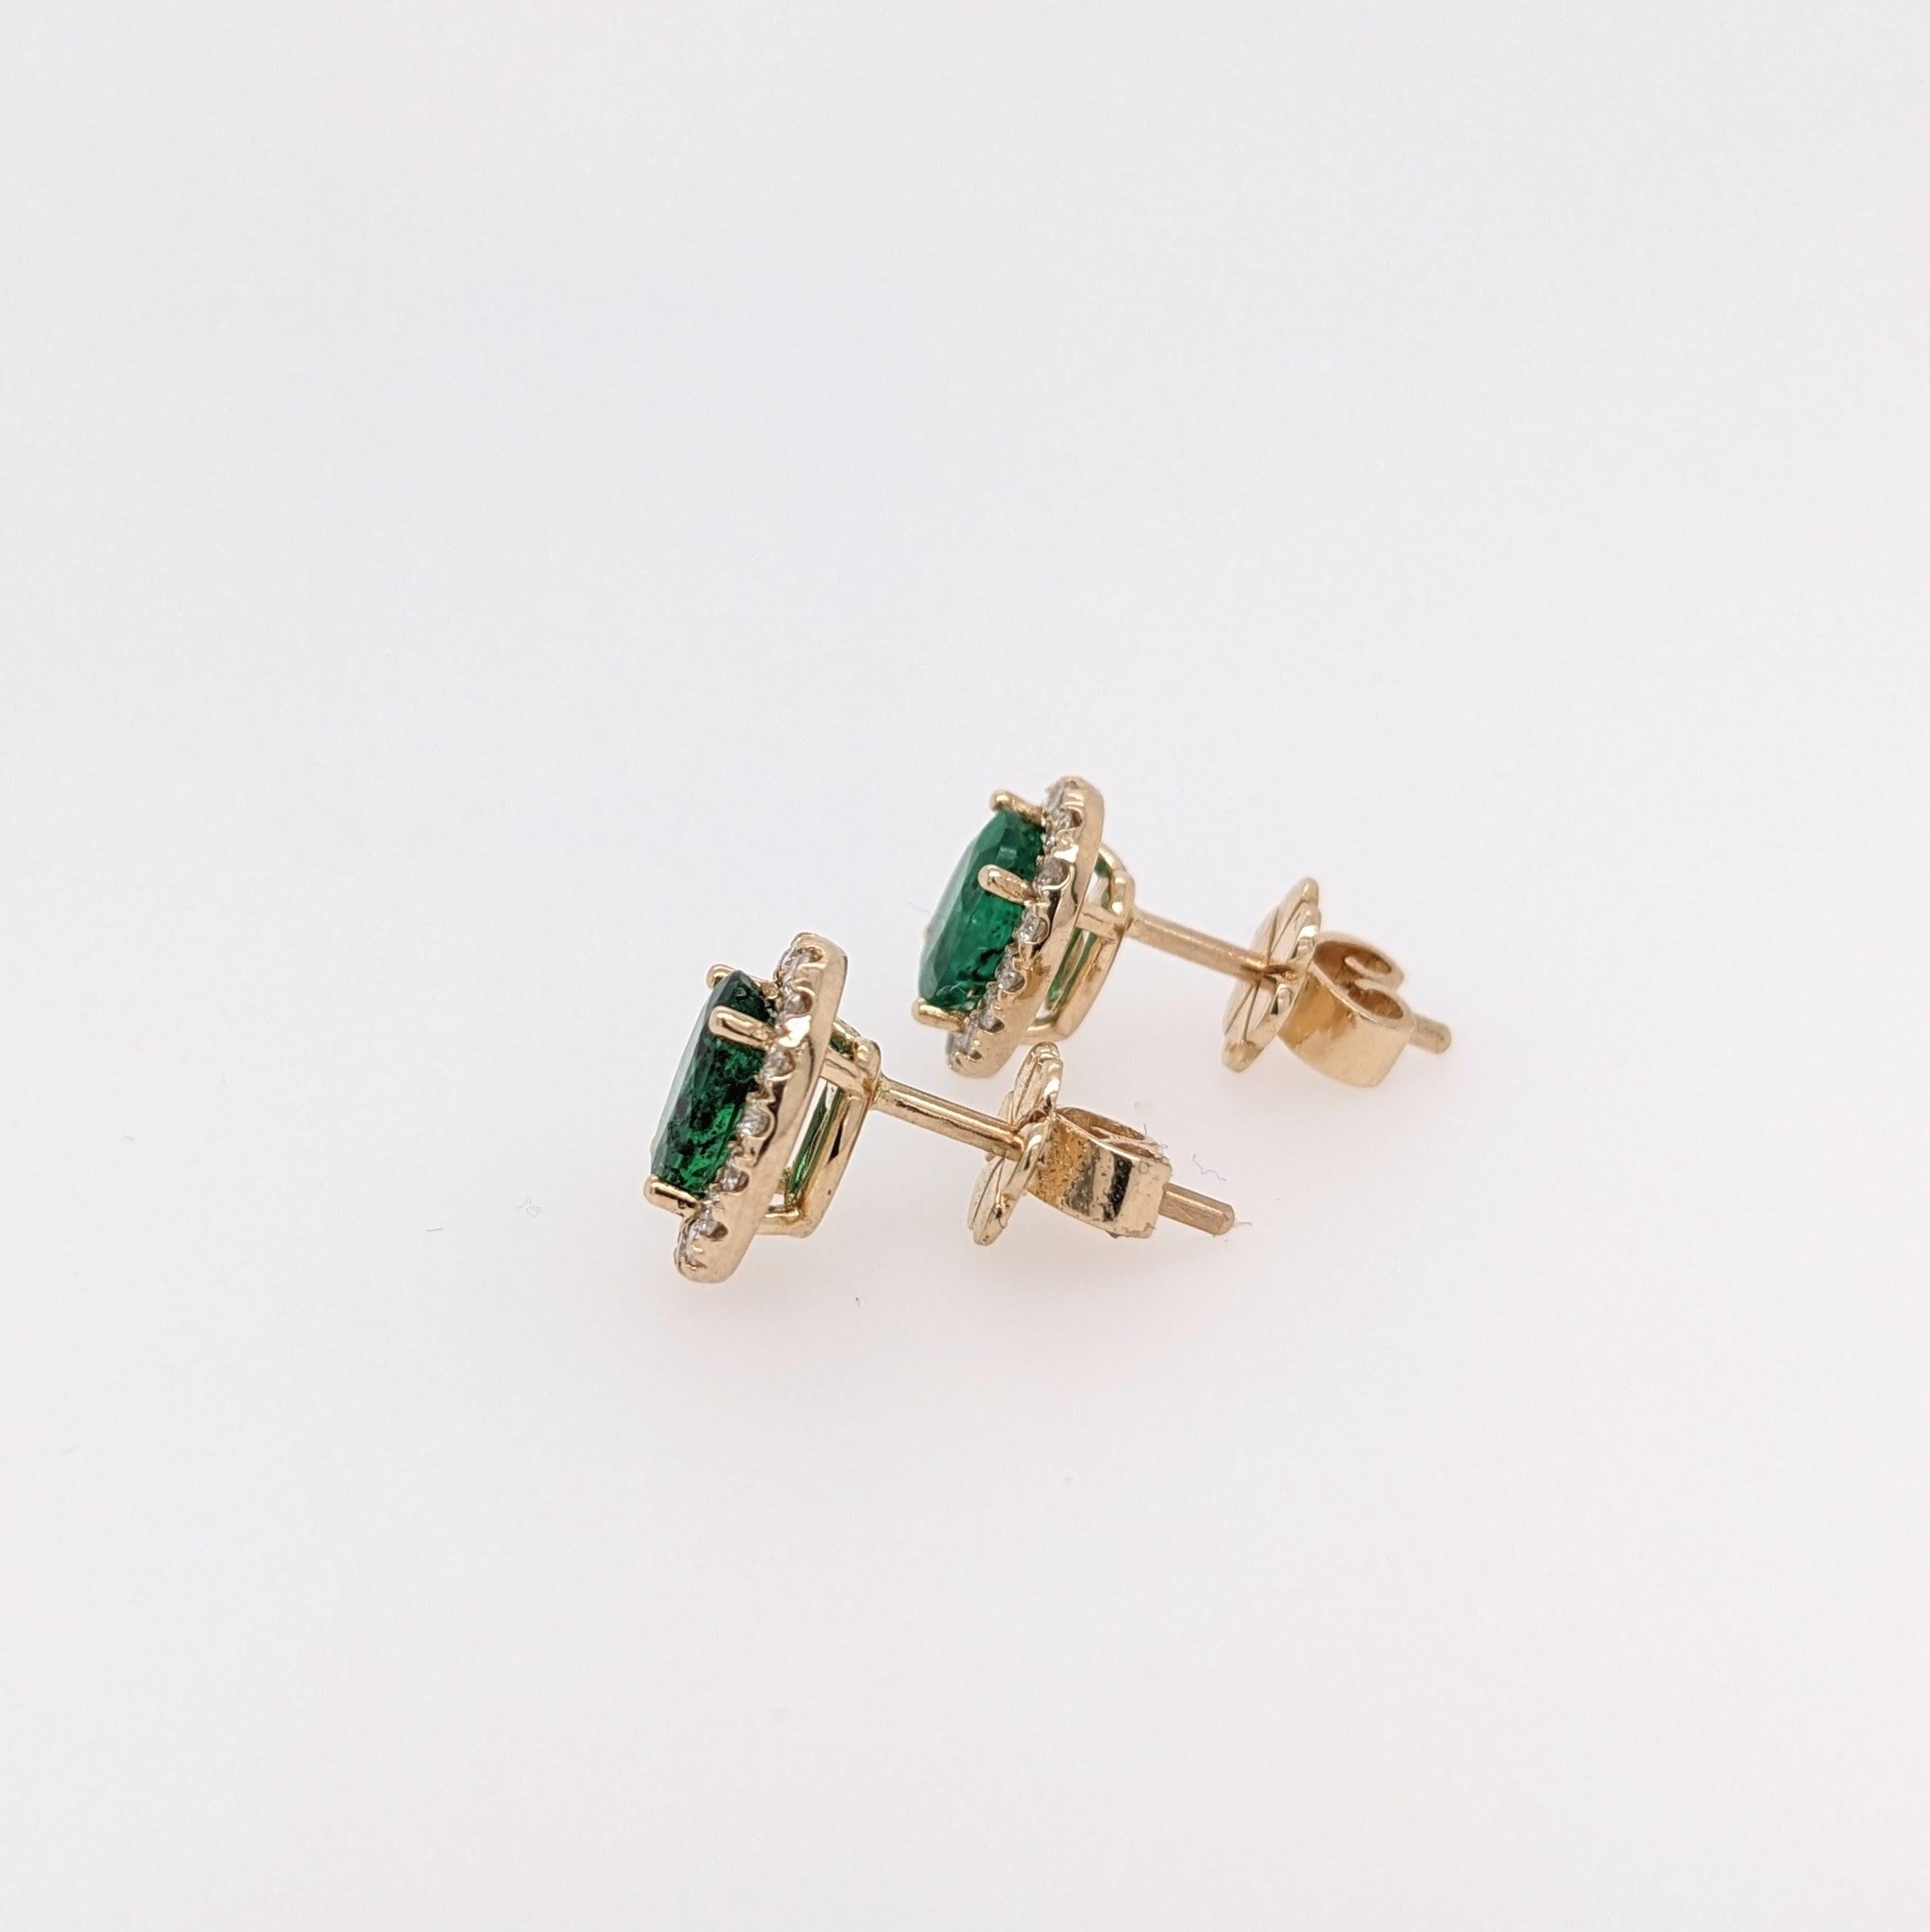 This sparkling earring set features a pair of vibrant earth mined emeralds with a pave diamond halo. A stunning pair of stud earrings designed perfectly for an eye catching engagement or anniversary. These earrings also make a beautiful birthstone